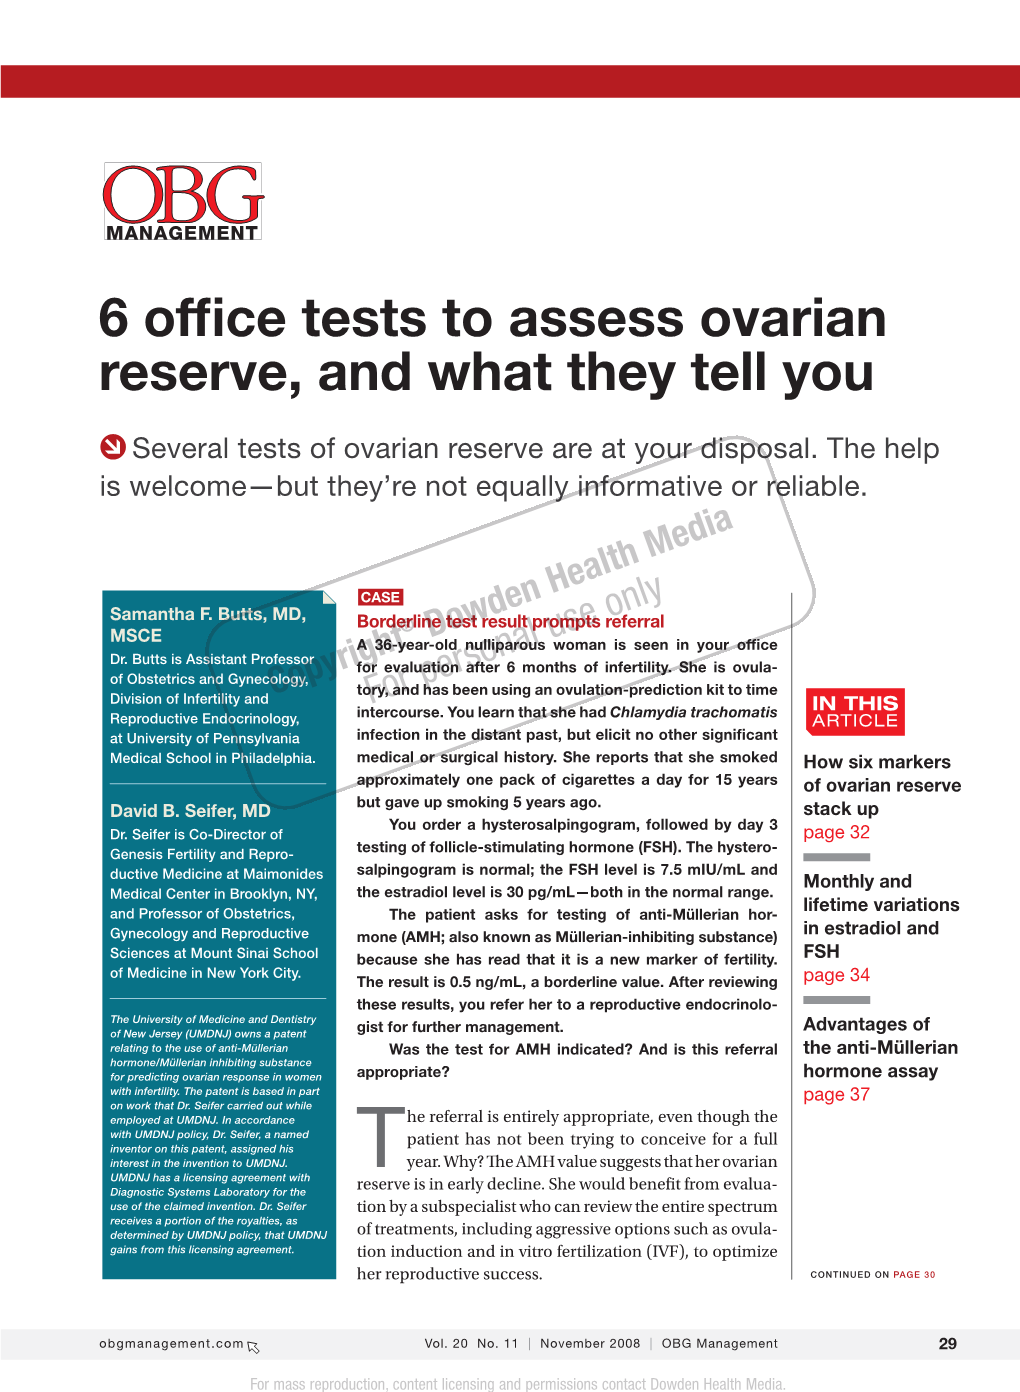 6 Office Tests to Assess Ovarian Reserve, and What They Tell